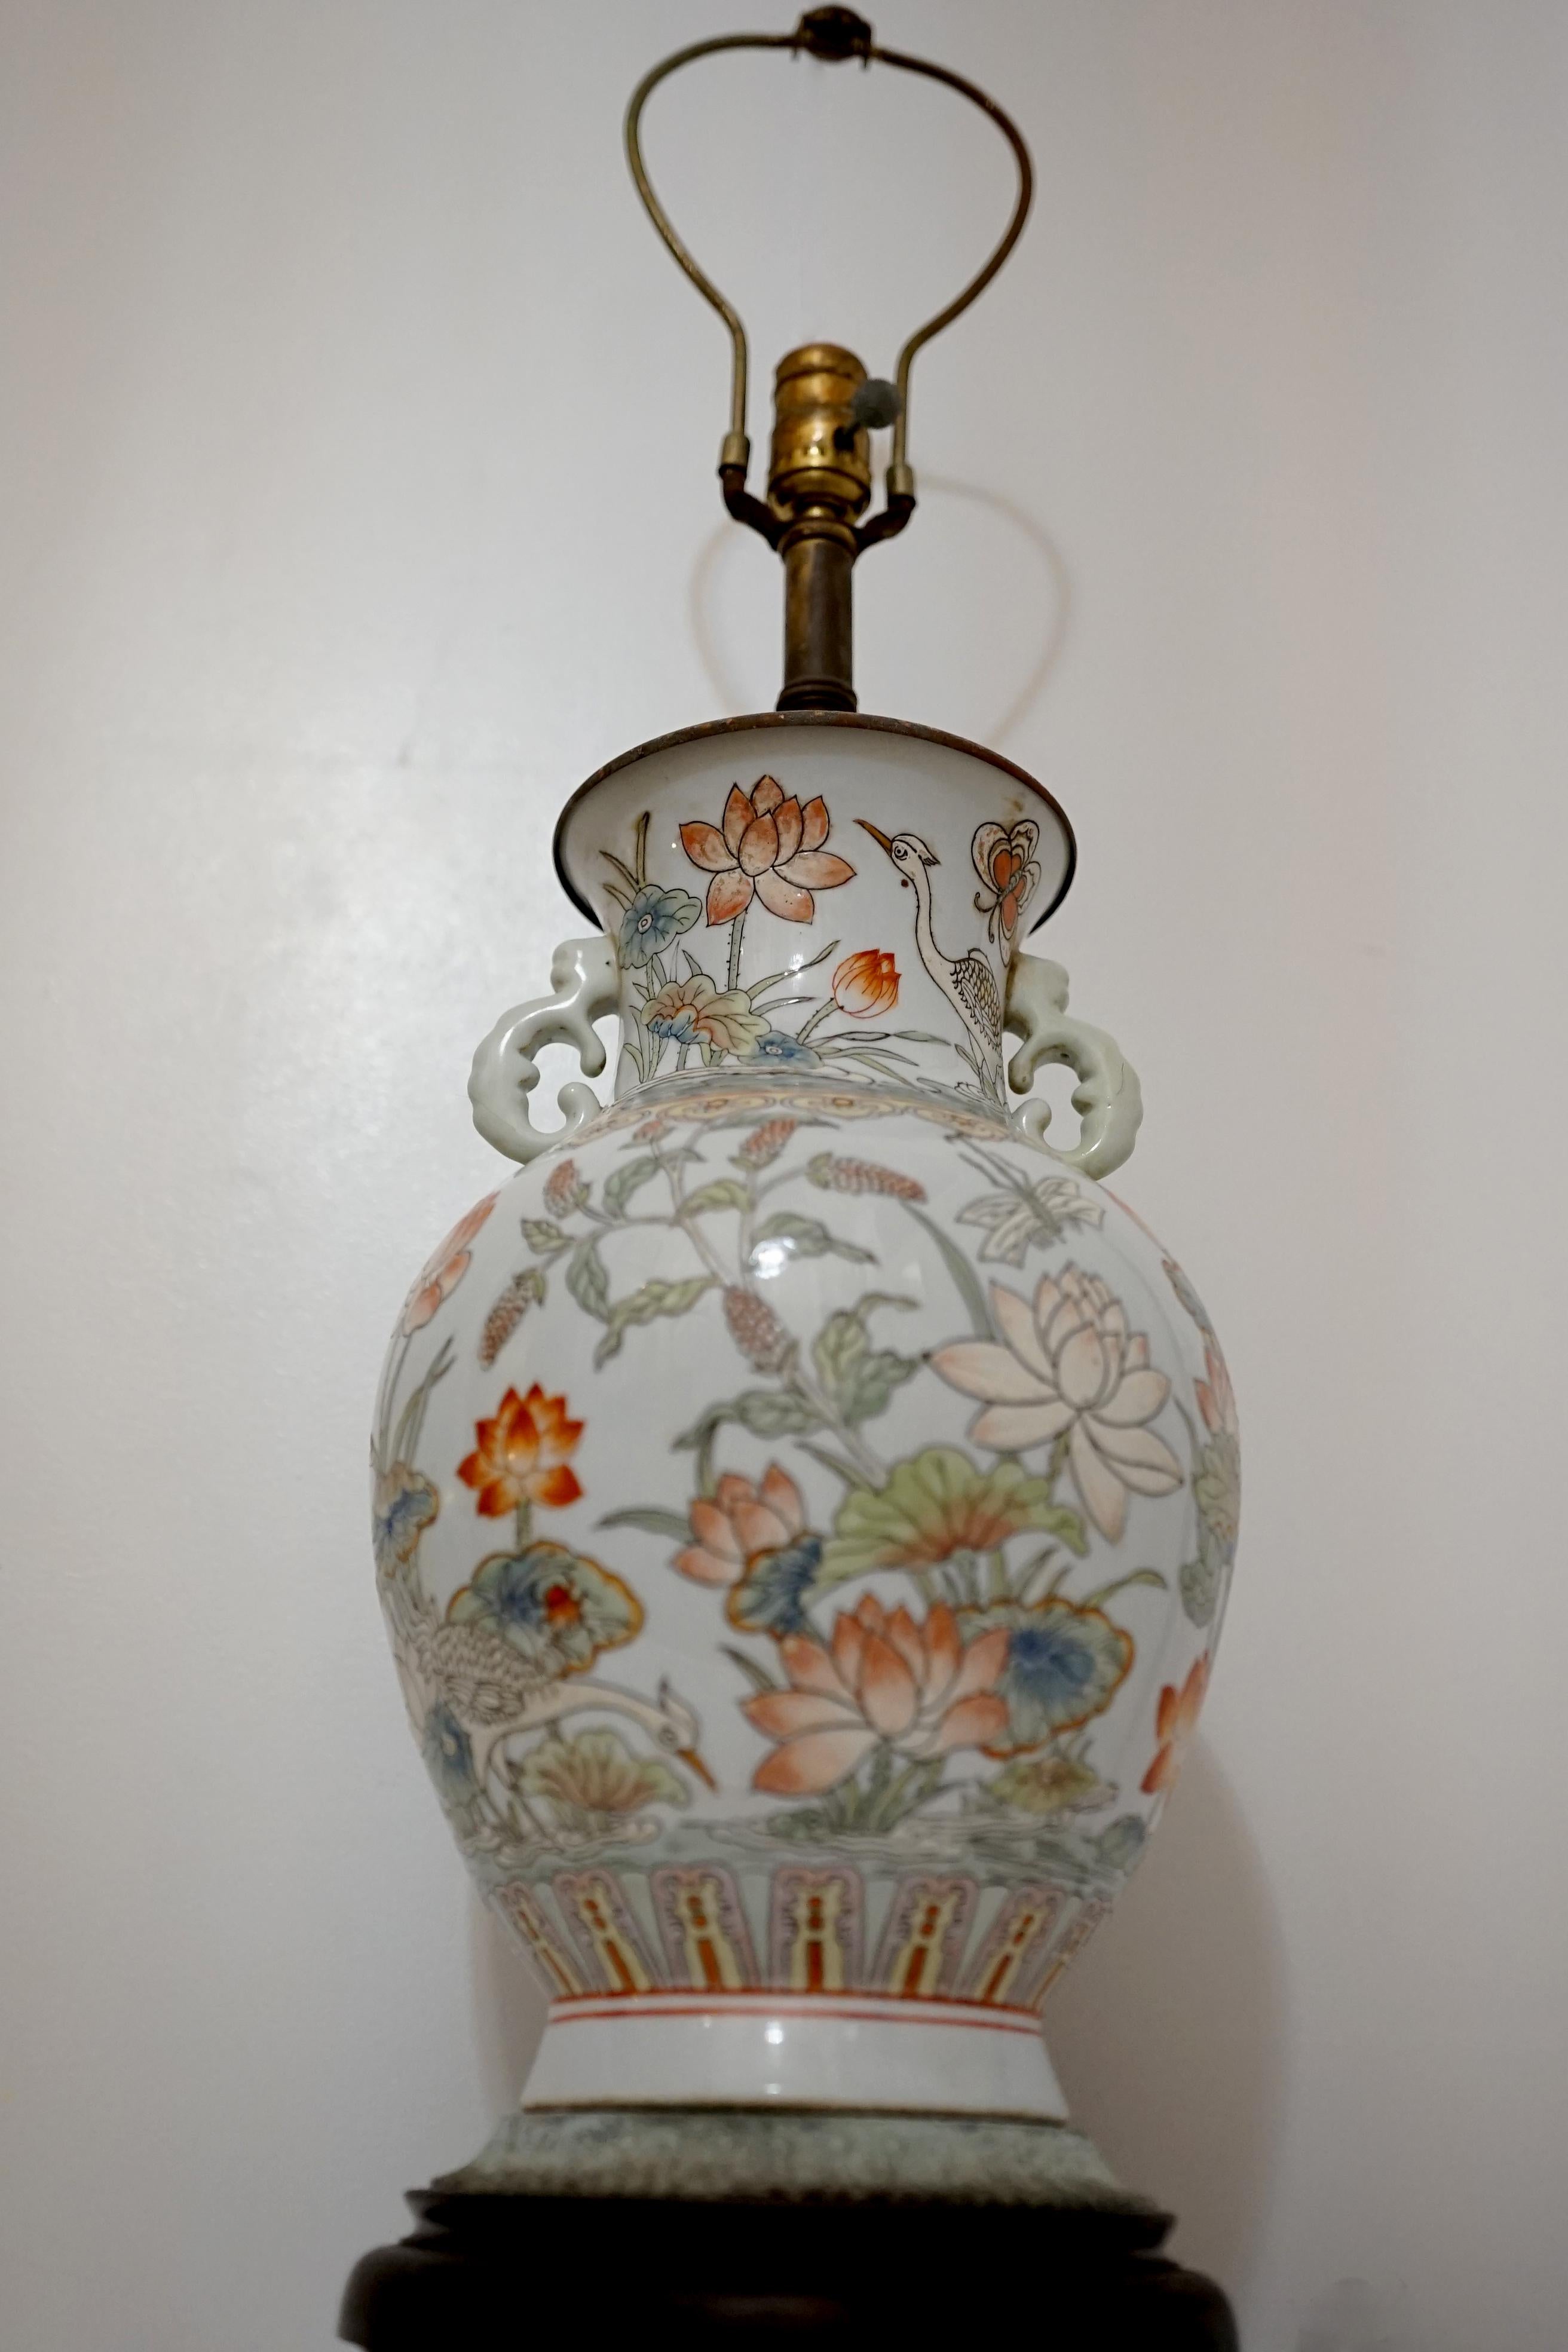 The color palette, the size and the fine artwork on the surface of this late 19th century lamp make it stunning. This lamp has everything. Of circular section and baluster form with flaring rim, tall neck with exquisite pierced handles or ears, the